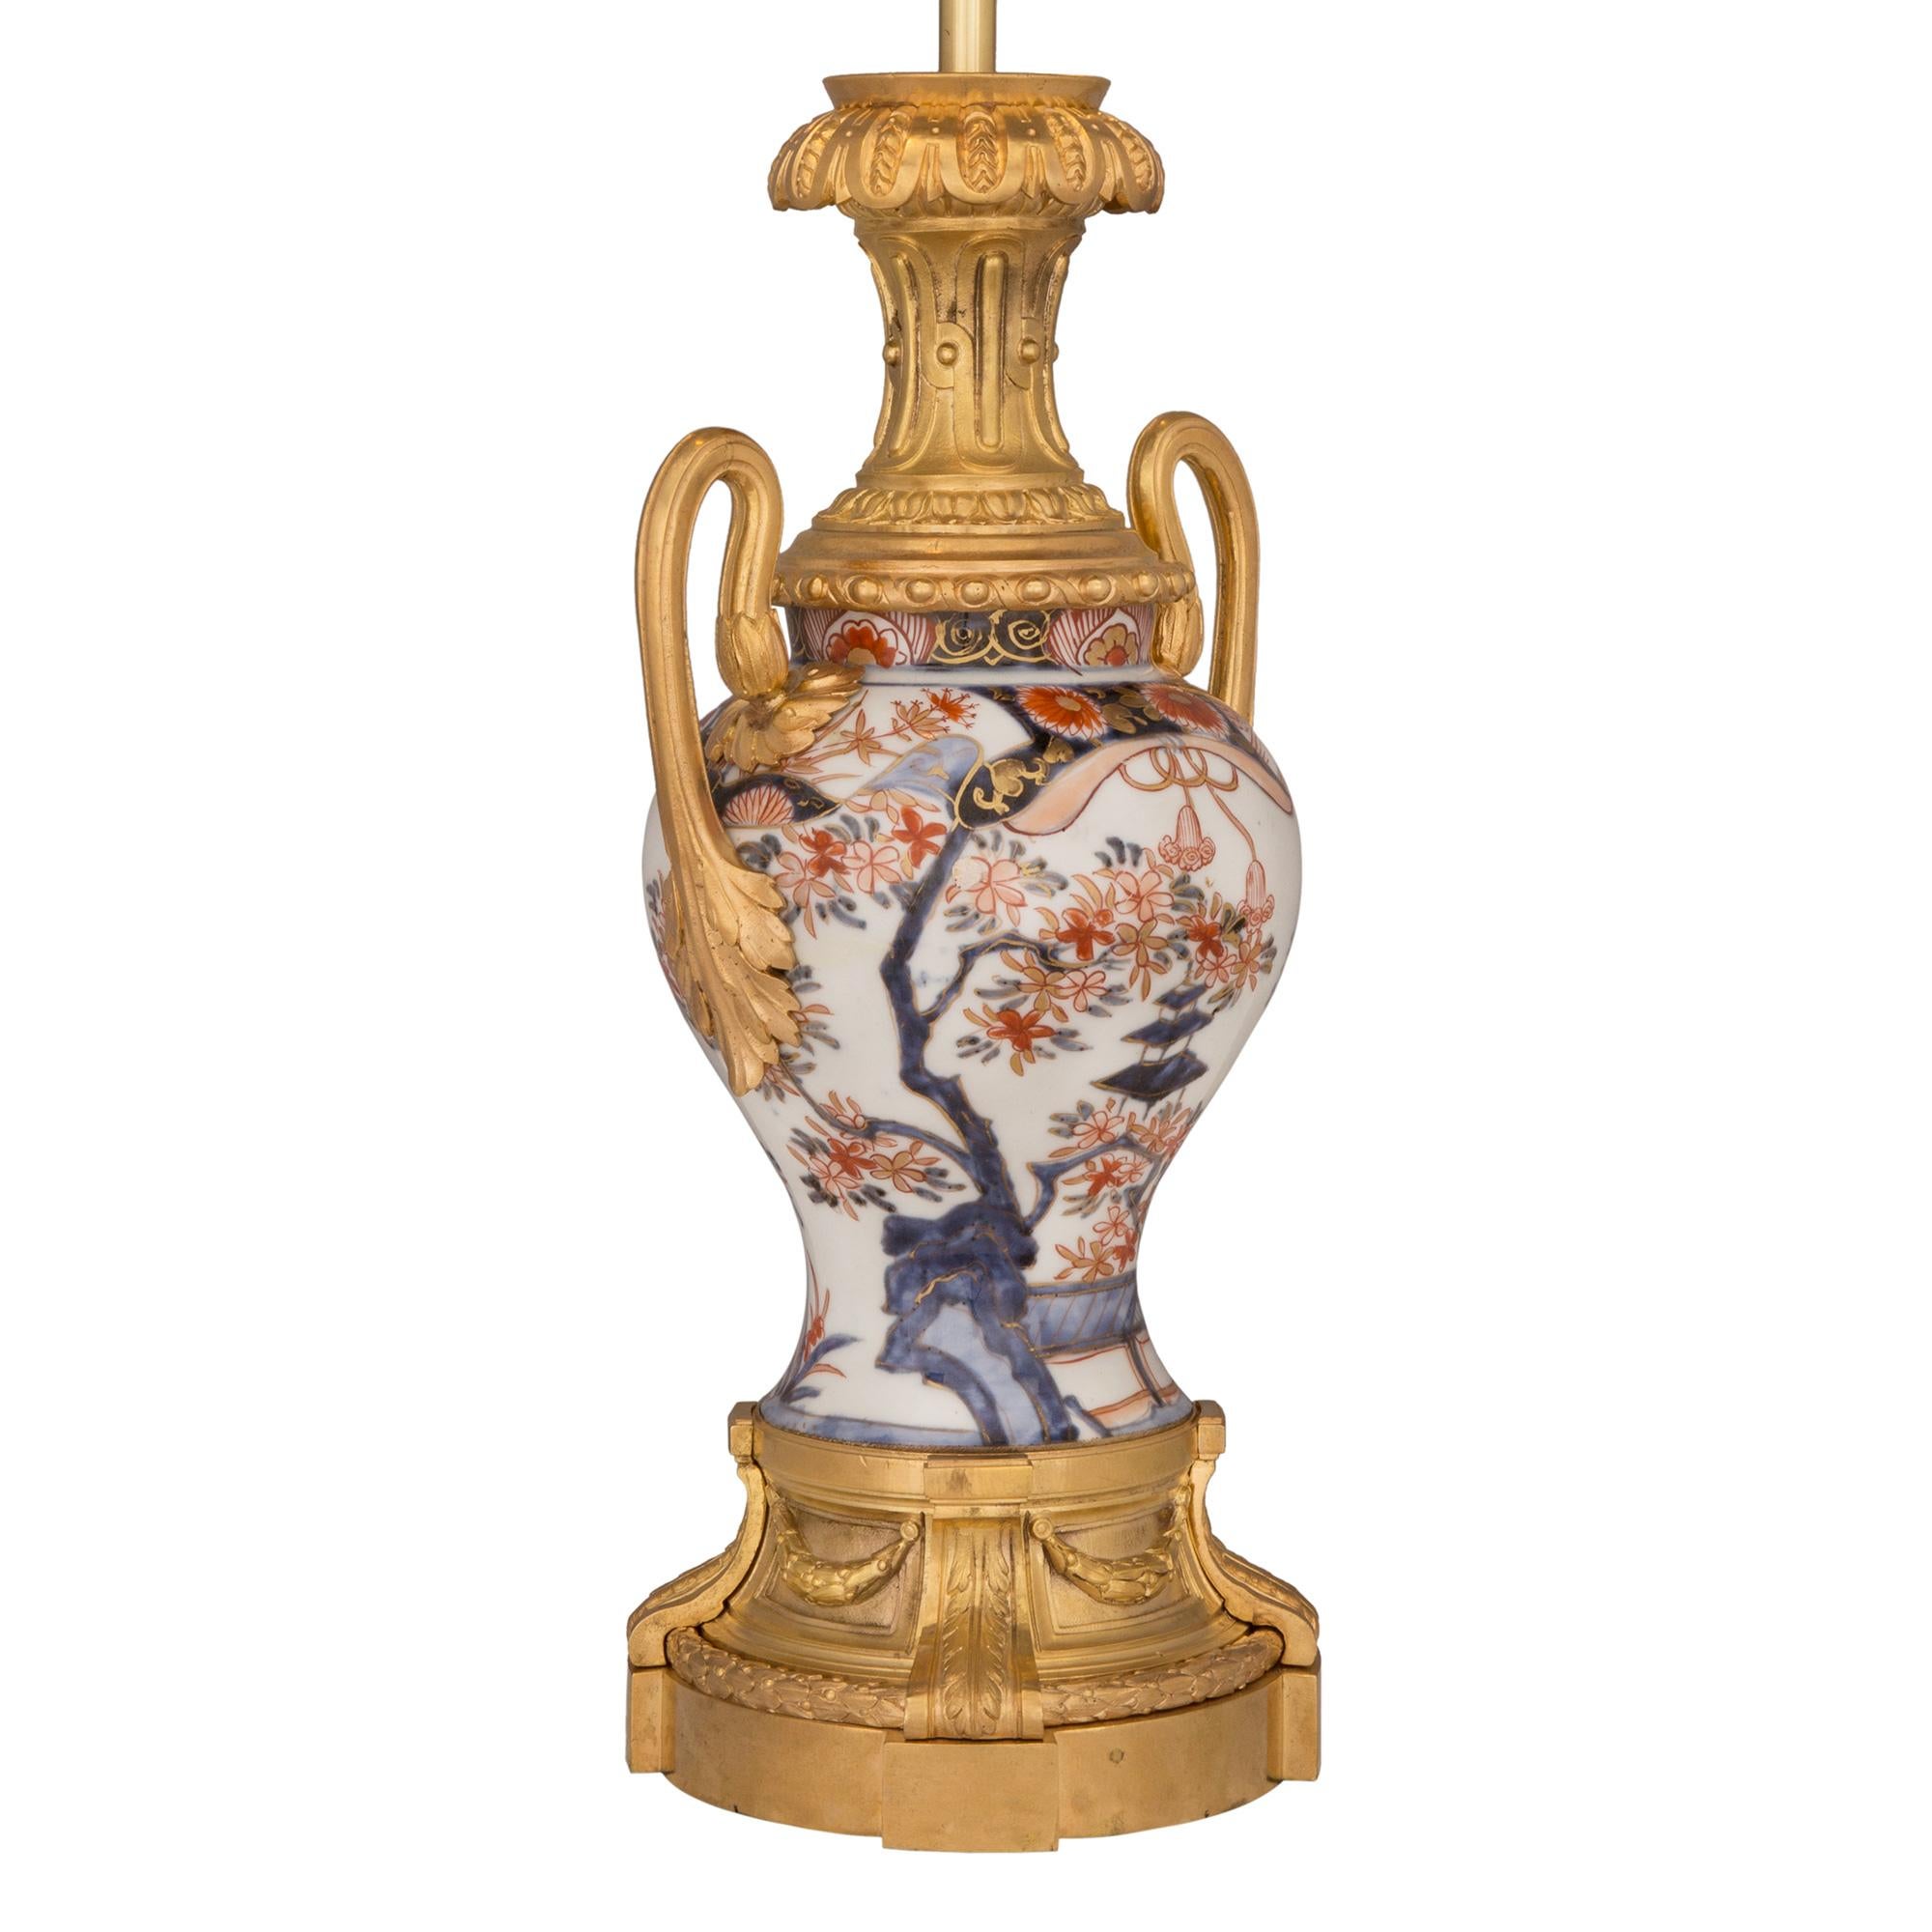 A lovely and high quality Asian and French collaboration 19th century Louis XVI st. Imari porcelain and ormolu lamp. The lamp is raised by an elegant ormolu base with fine wrap around berried laurel garlands and elegant scrolled movements. The